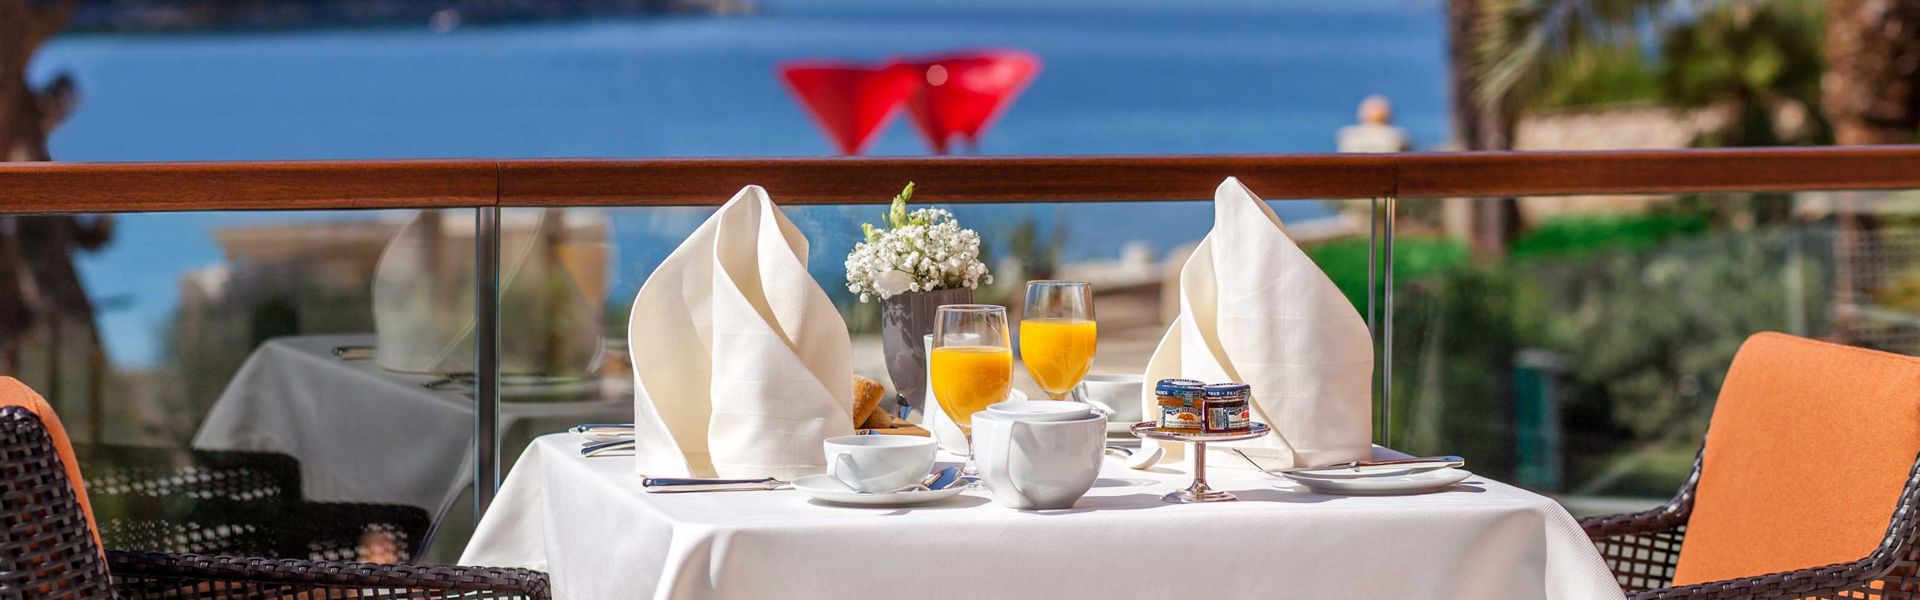 Recommendations for tipping in Croatia | Croatia.hr